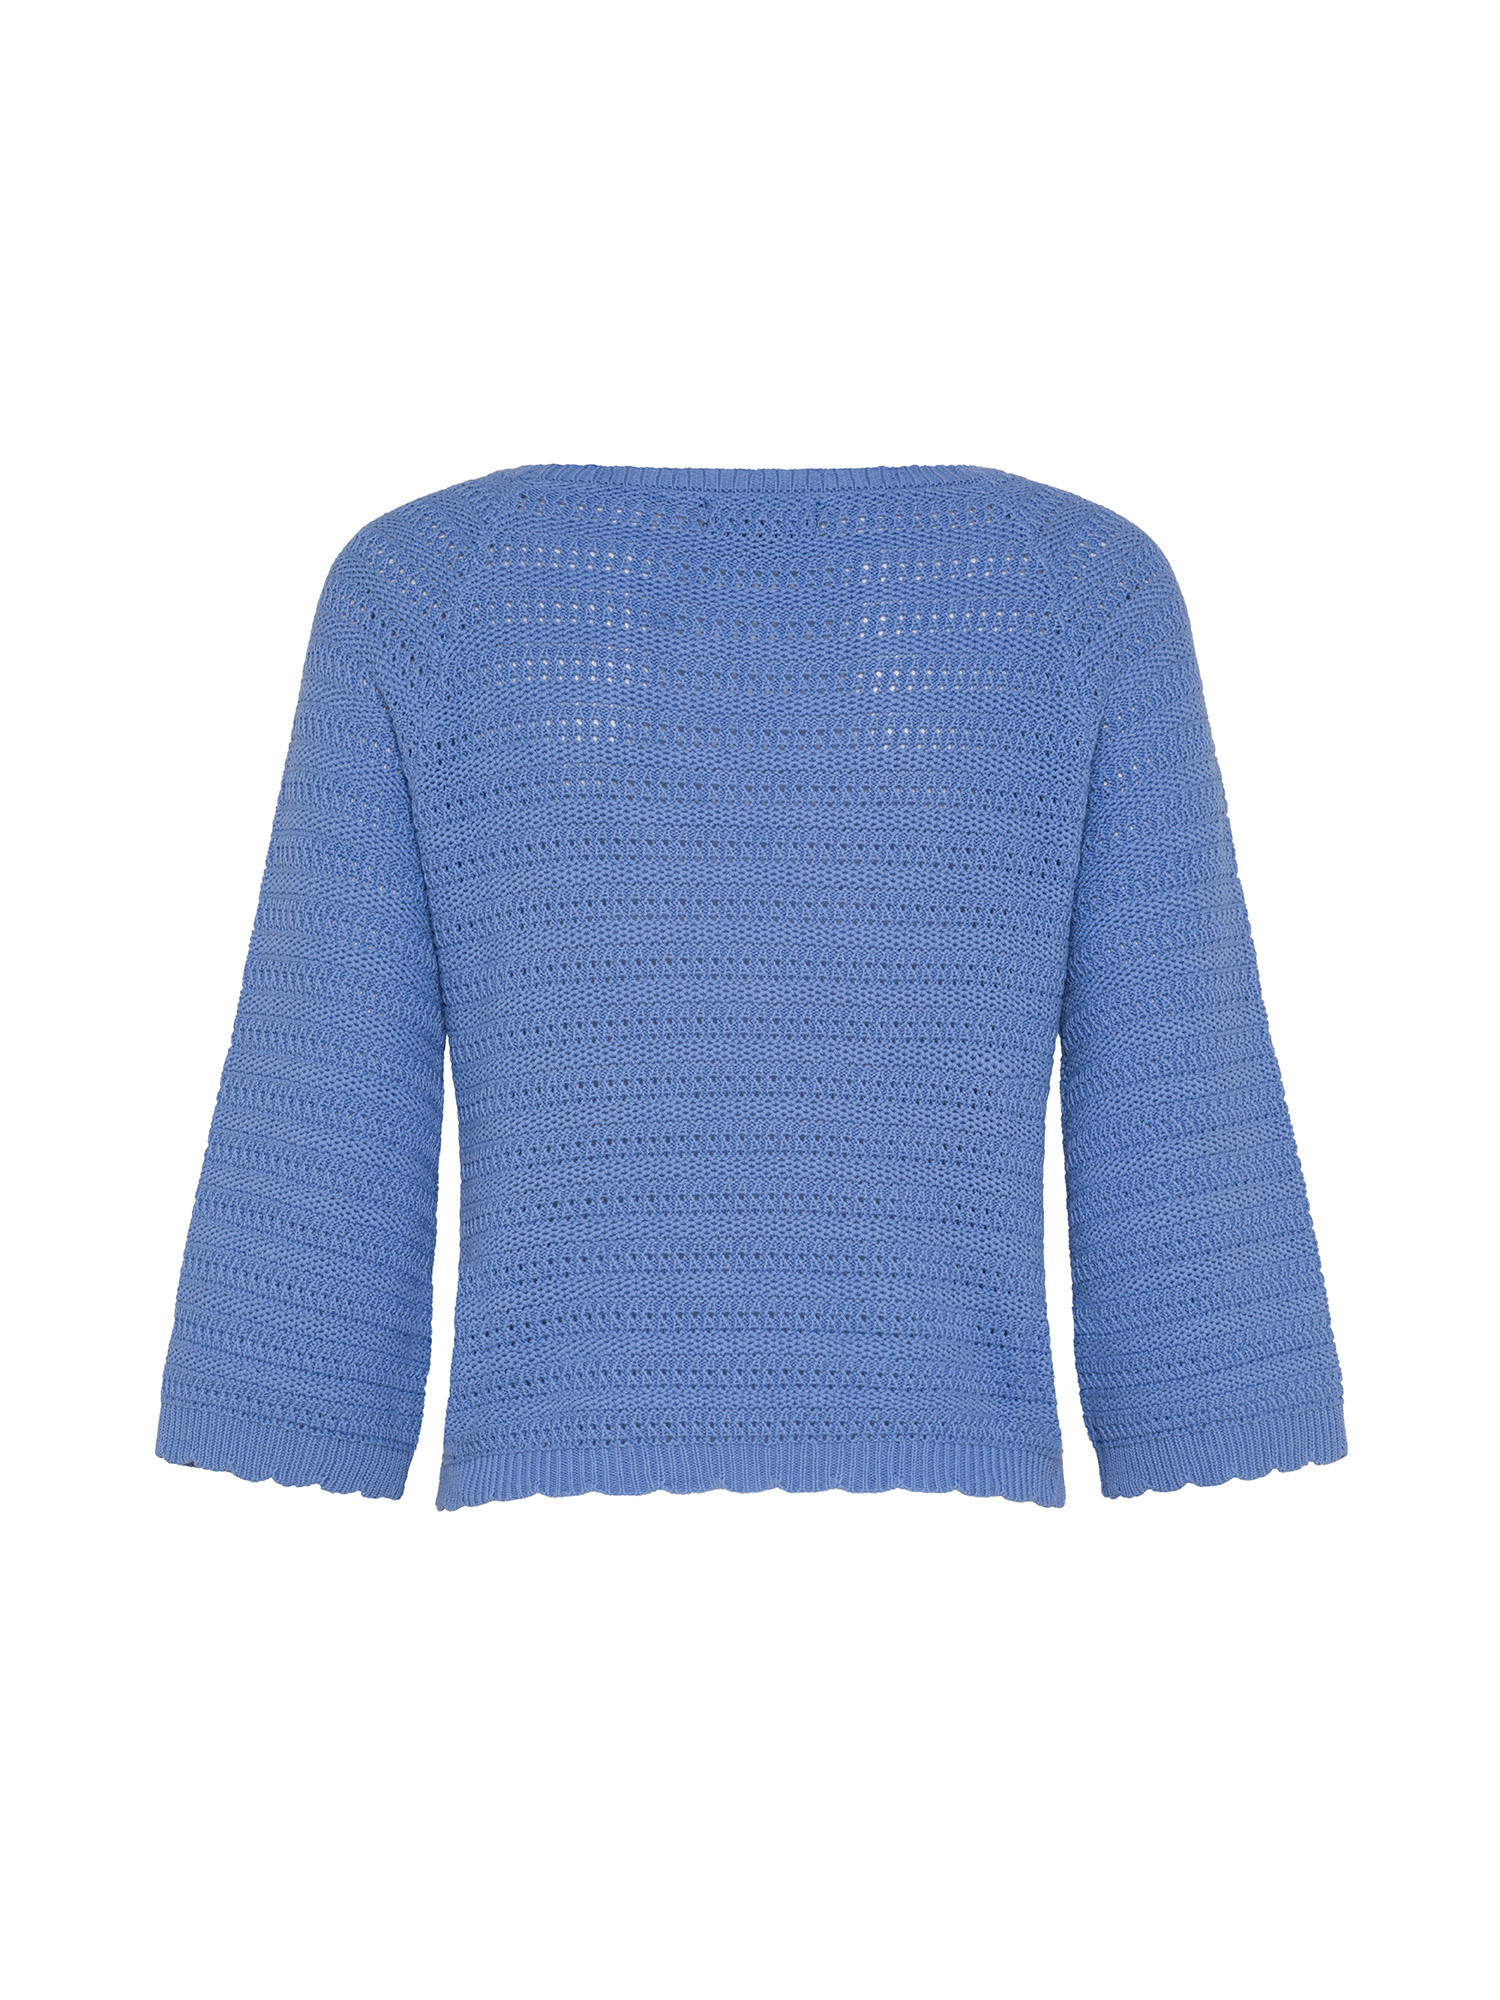 Koan - Fancy stitch pullover in cotton with embroidery, Light Blue, large image number 1